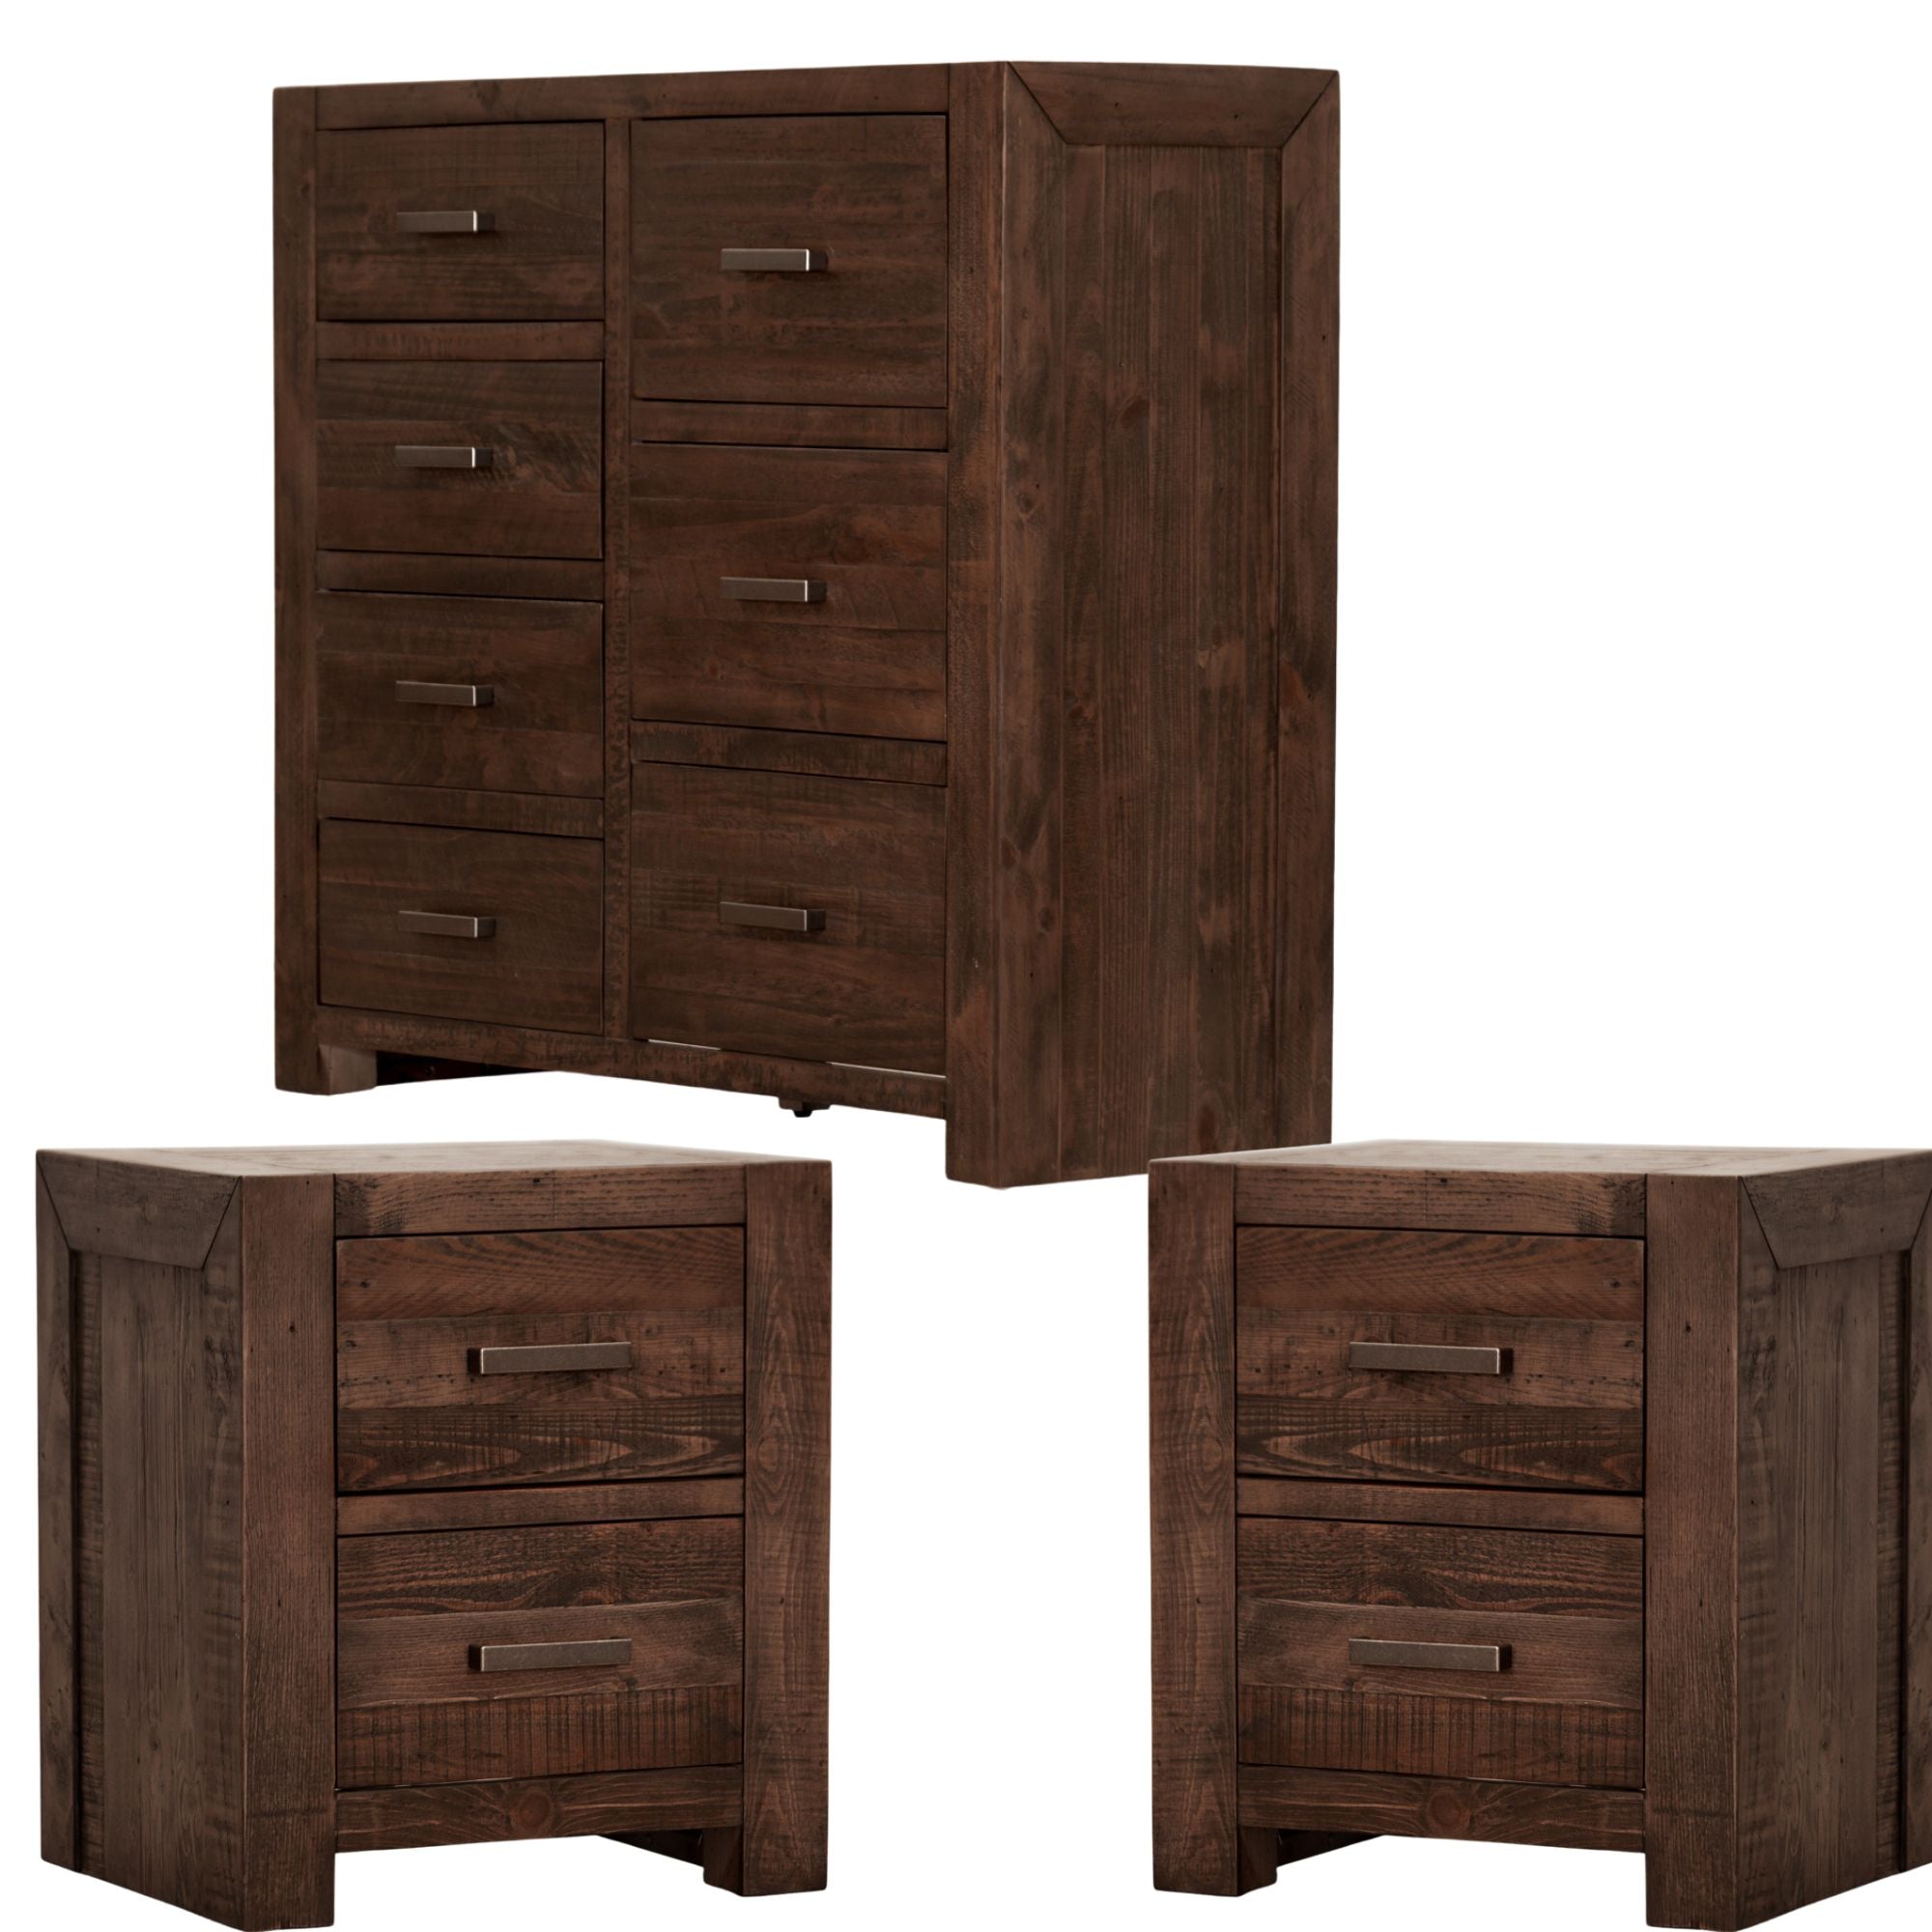 Catmint Set of 2 Bedside Table Tallboy Bedroom Furniture Package Set Grey Stone - SILBERSHELL